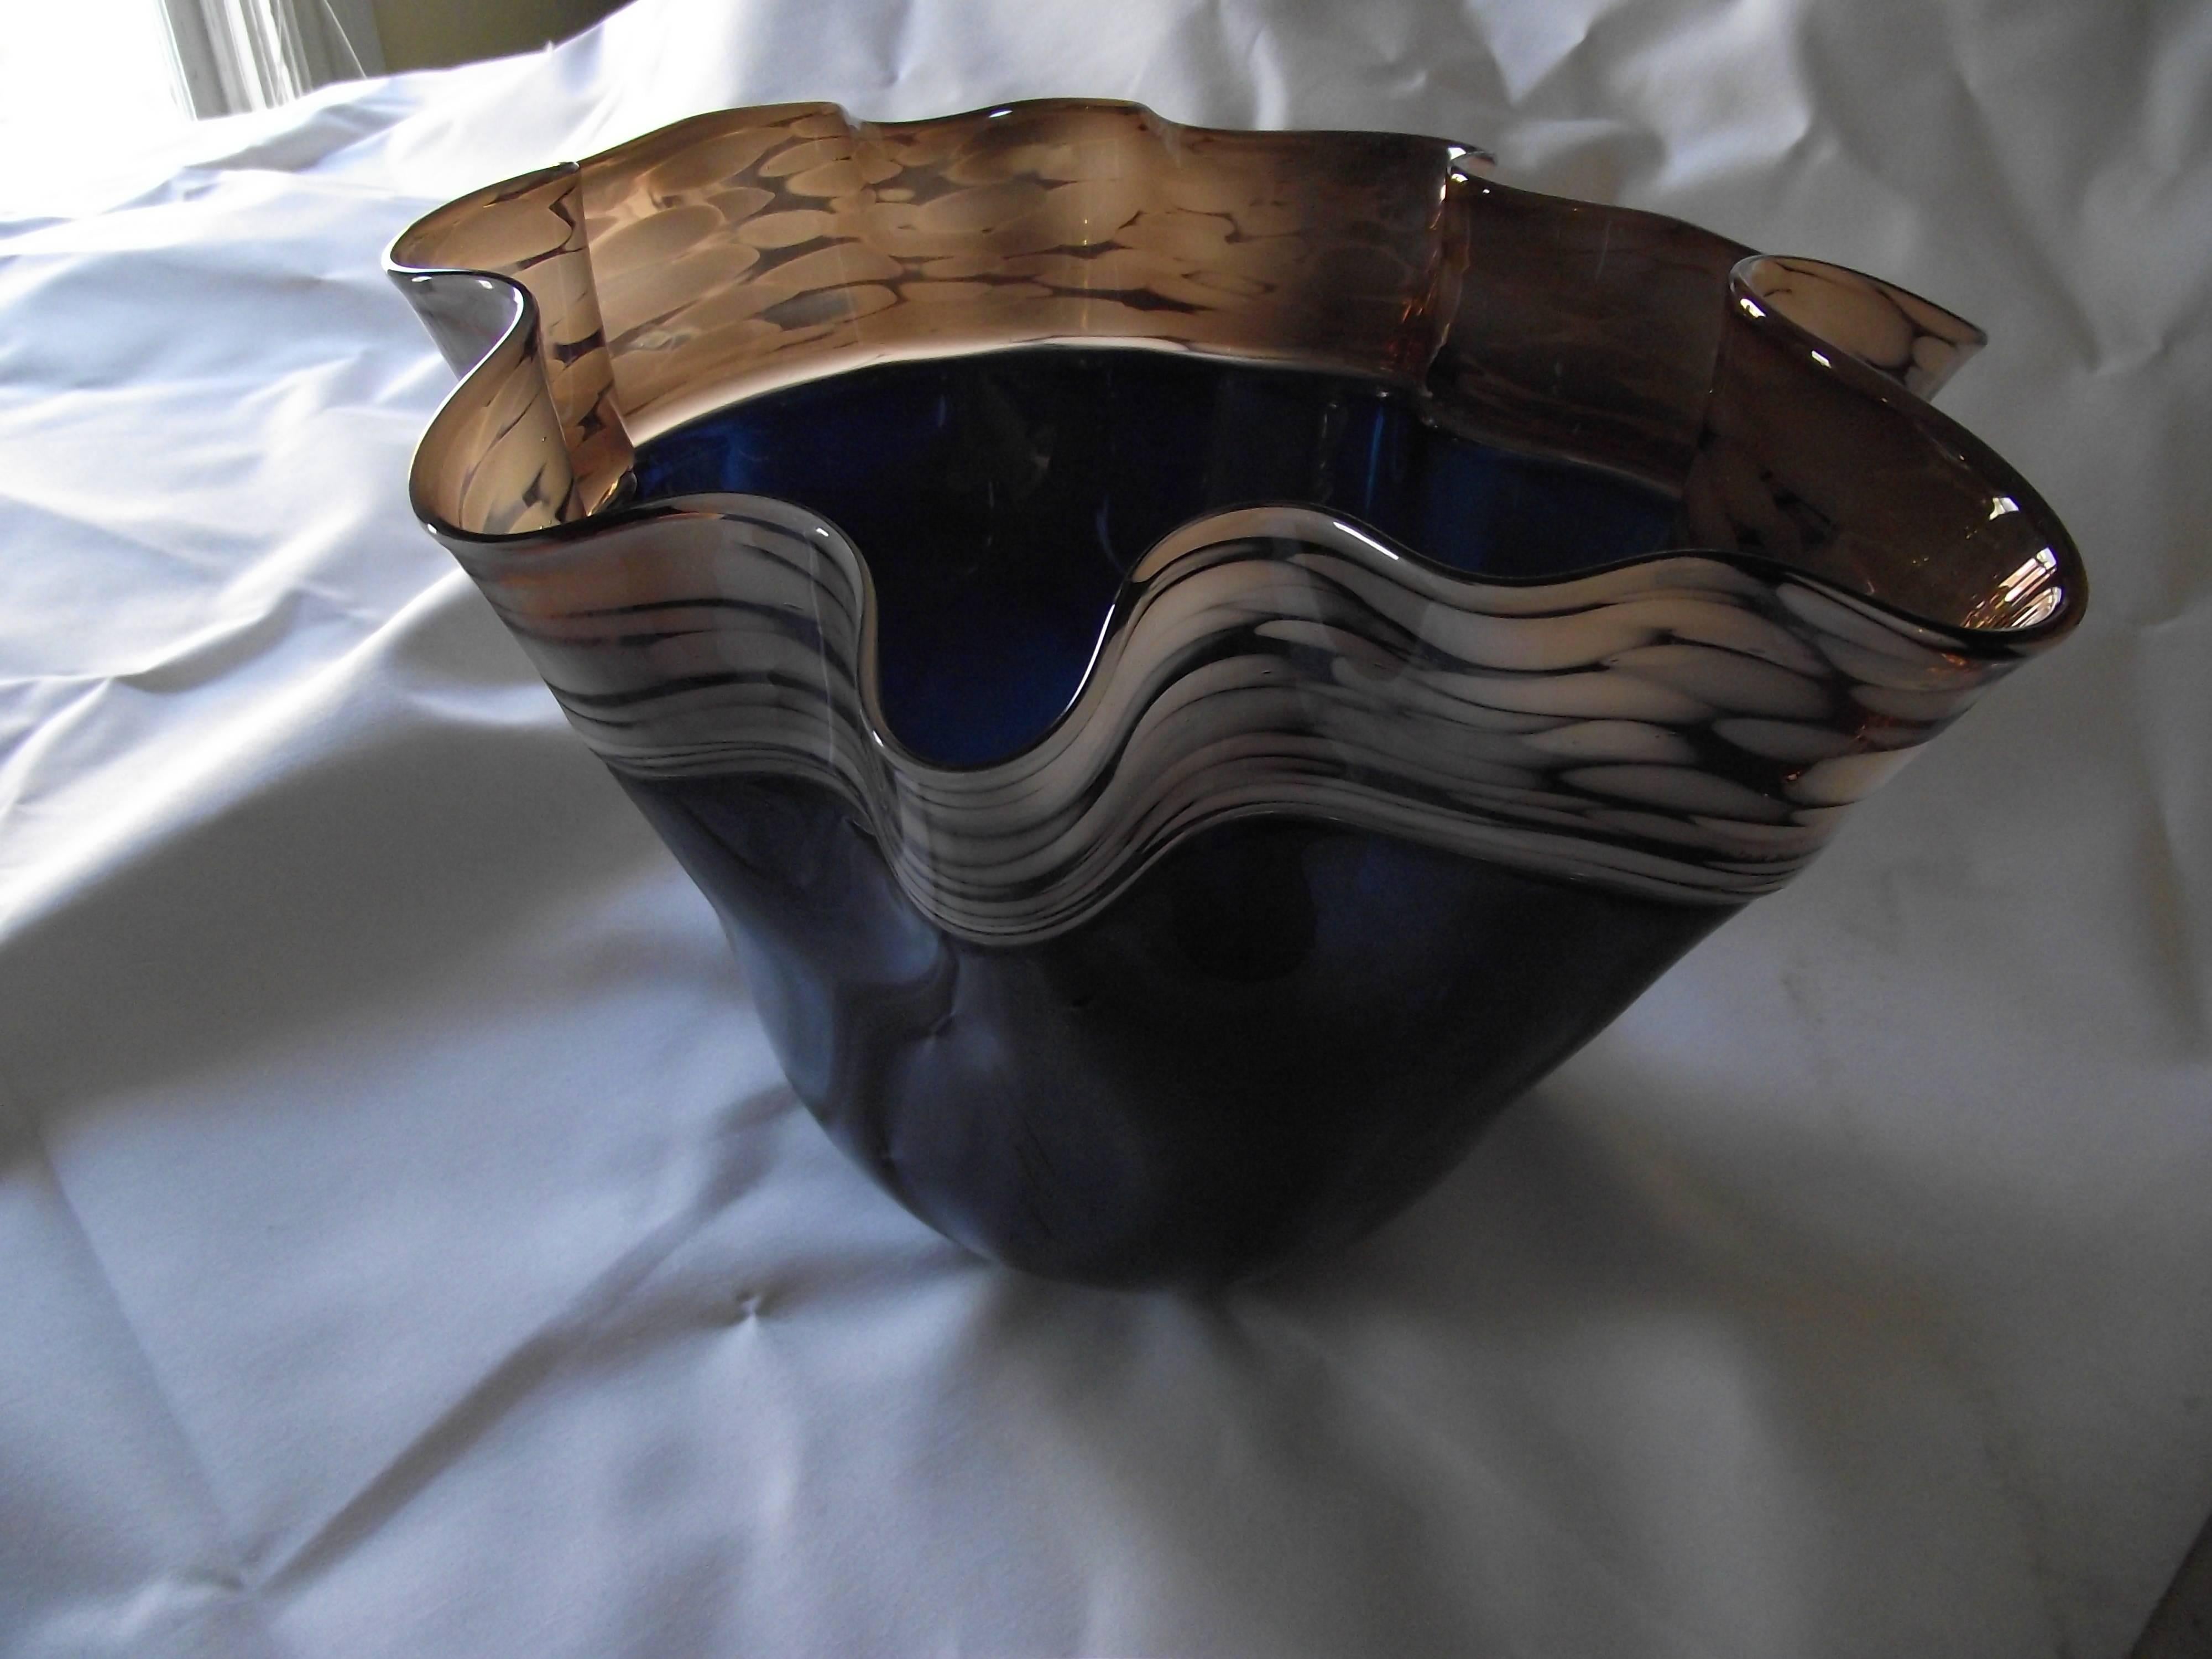 This handkerchief style bowl is a rich blue glass with an interesting brown trim. 

Even with its free-form design it has the bowl as a distinct elegance all its own.